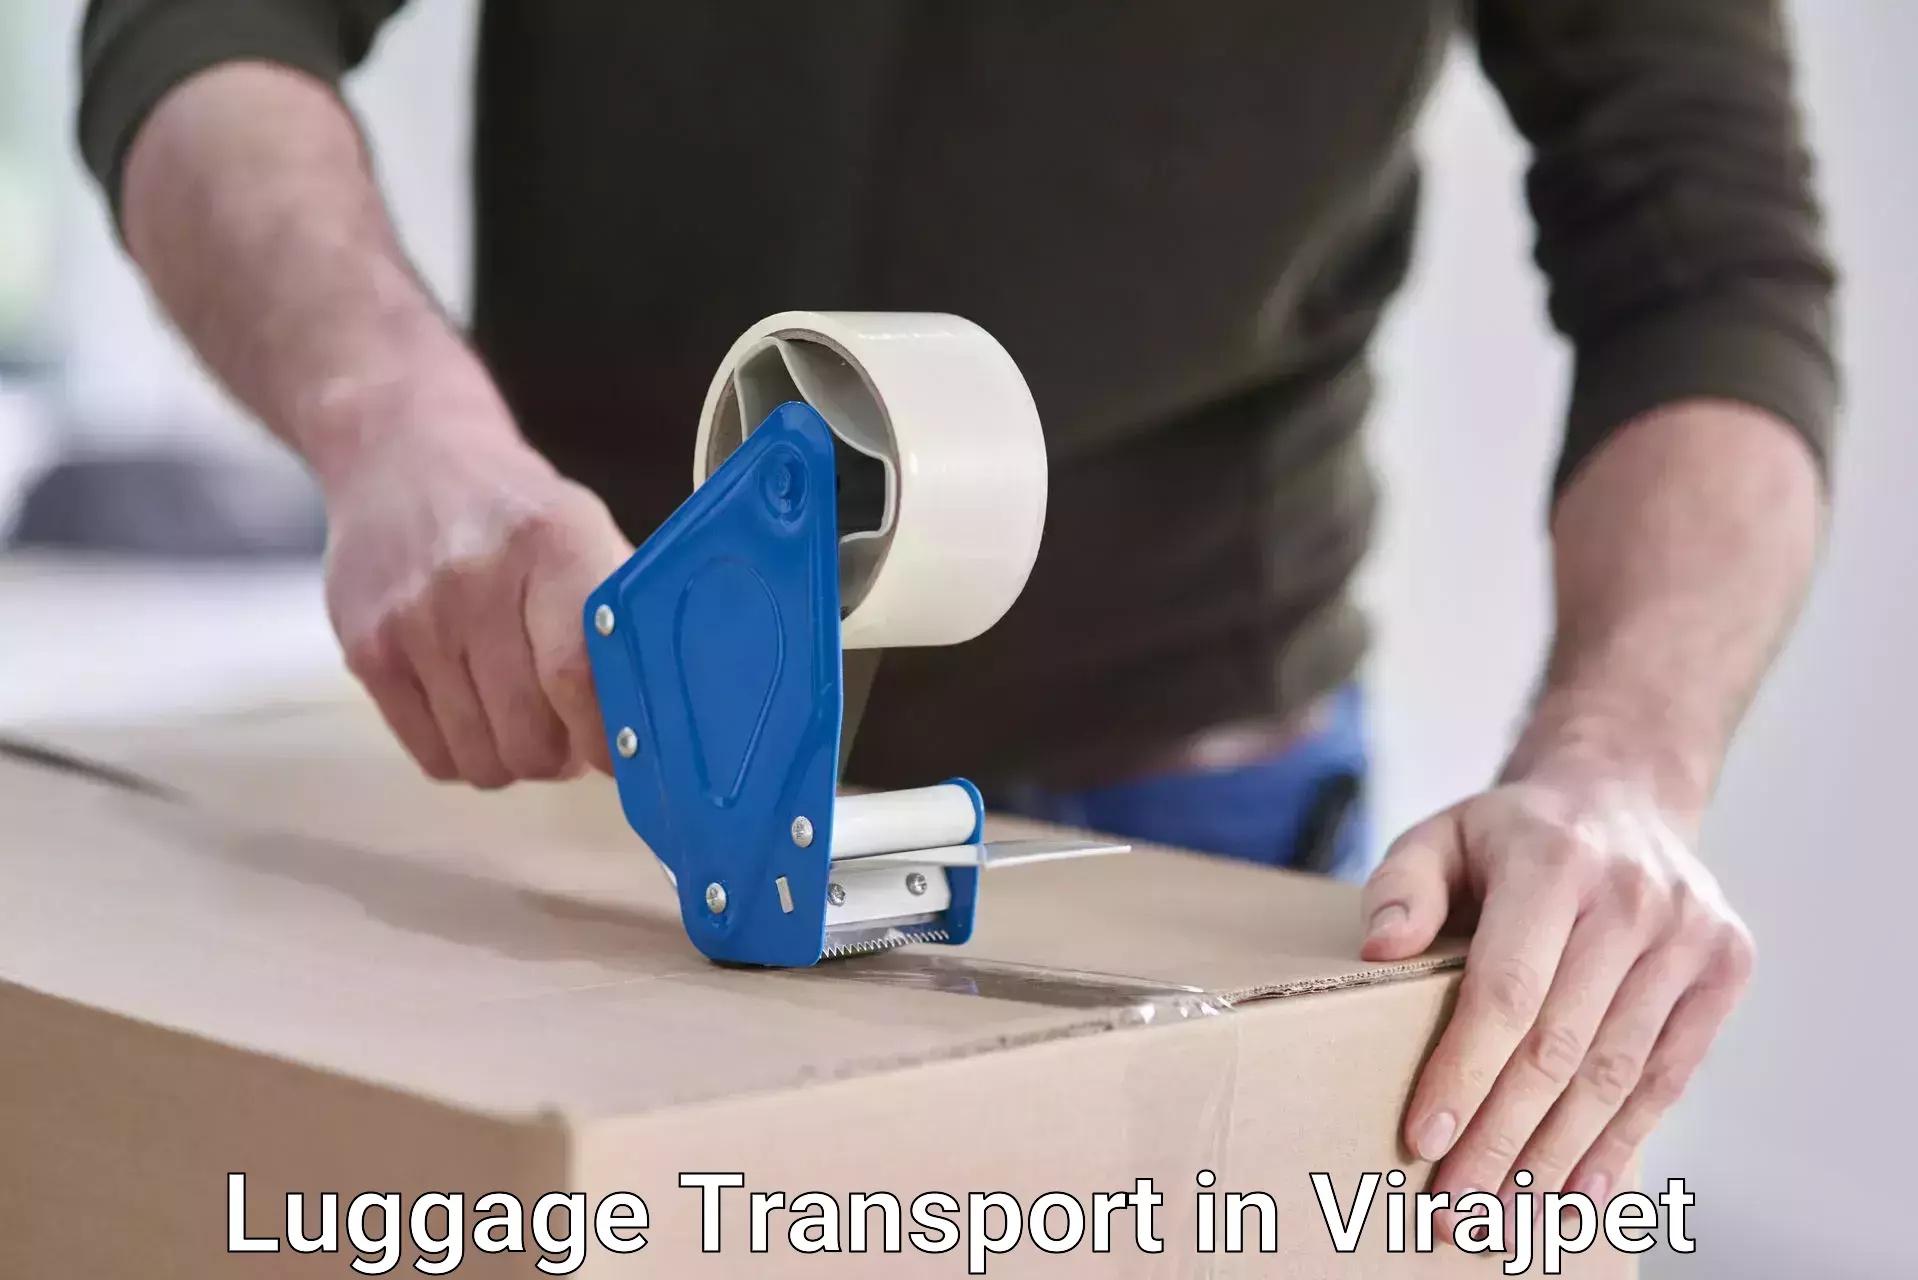 Luggage transport guidelines in Virajpet